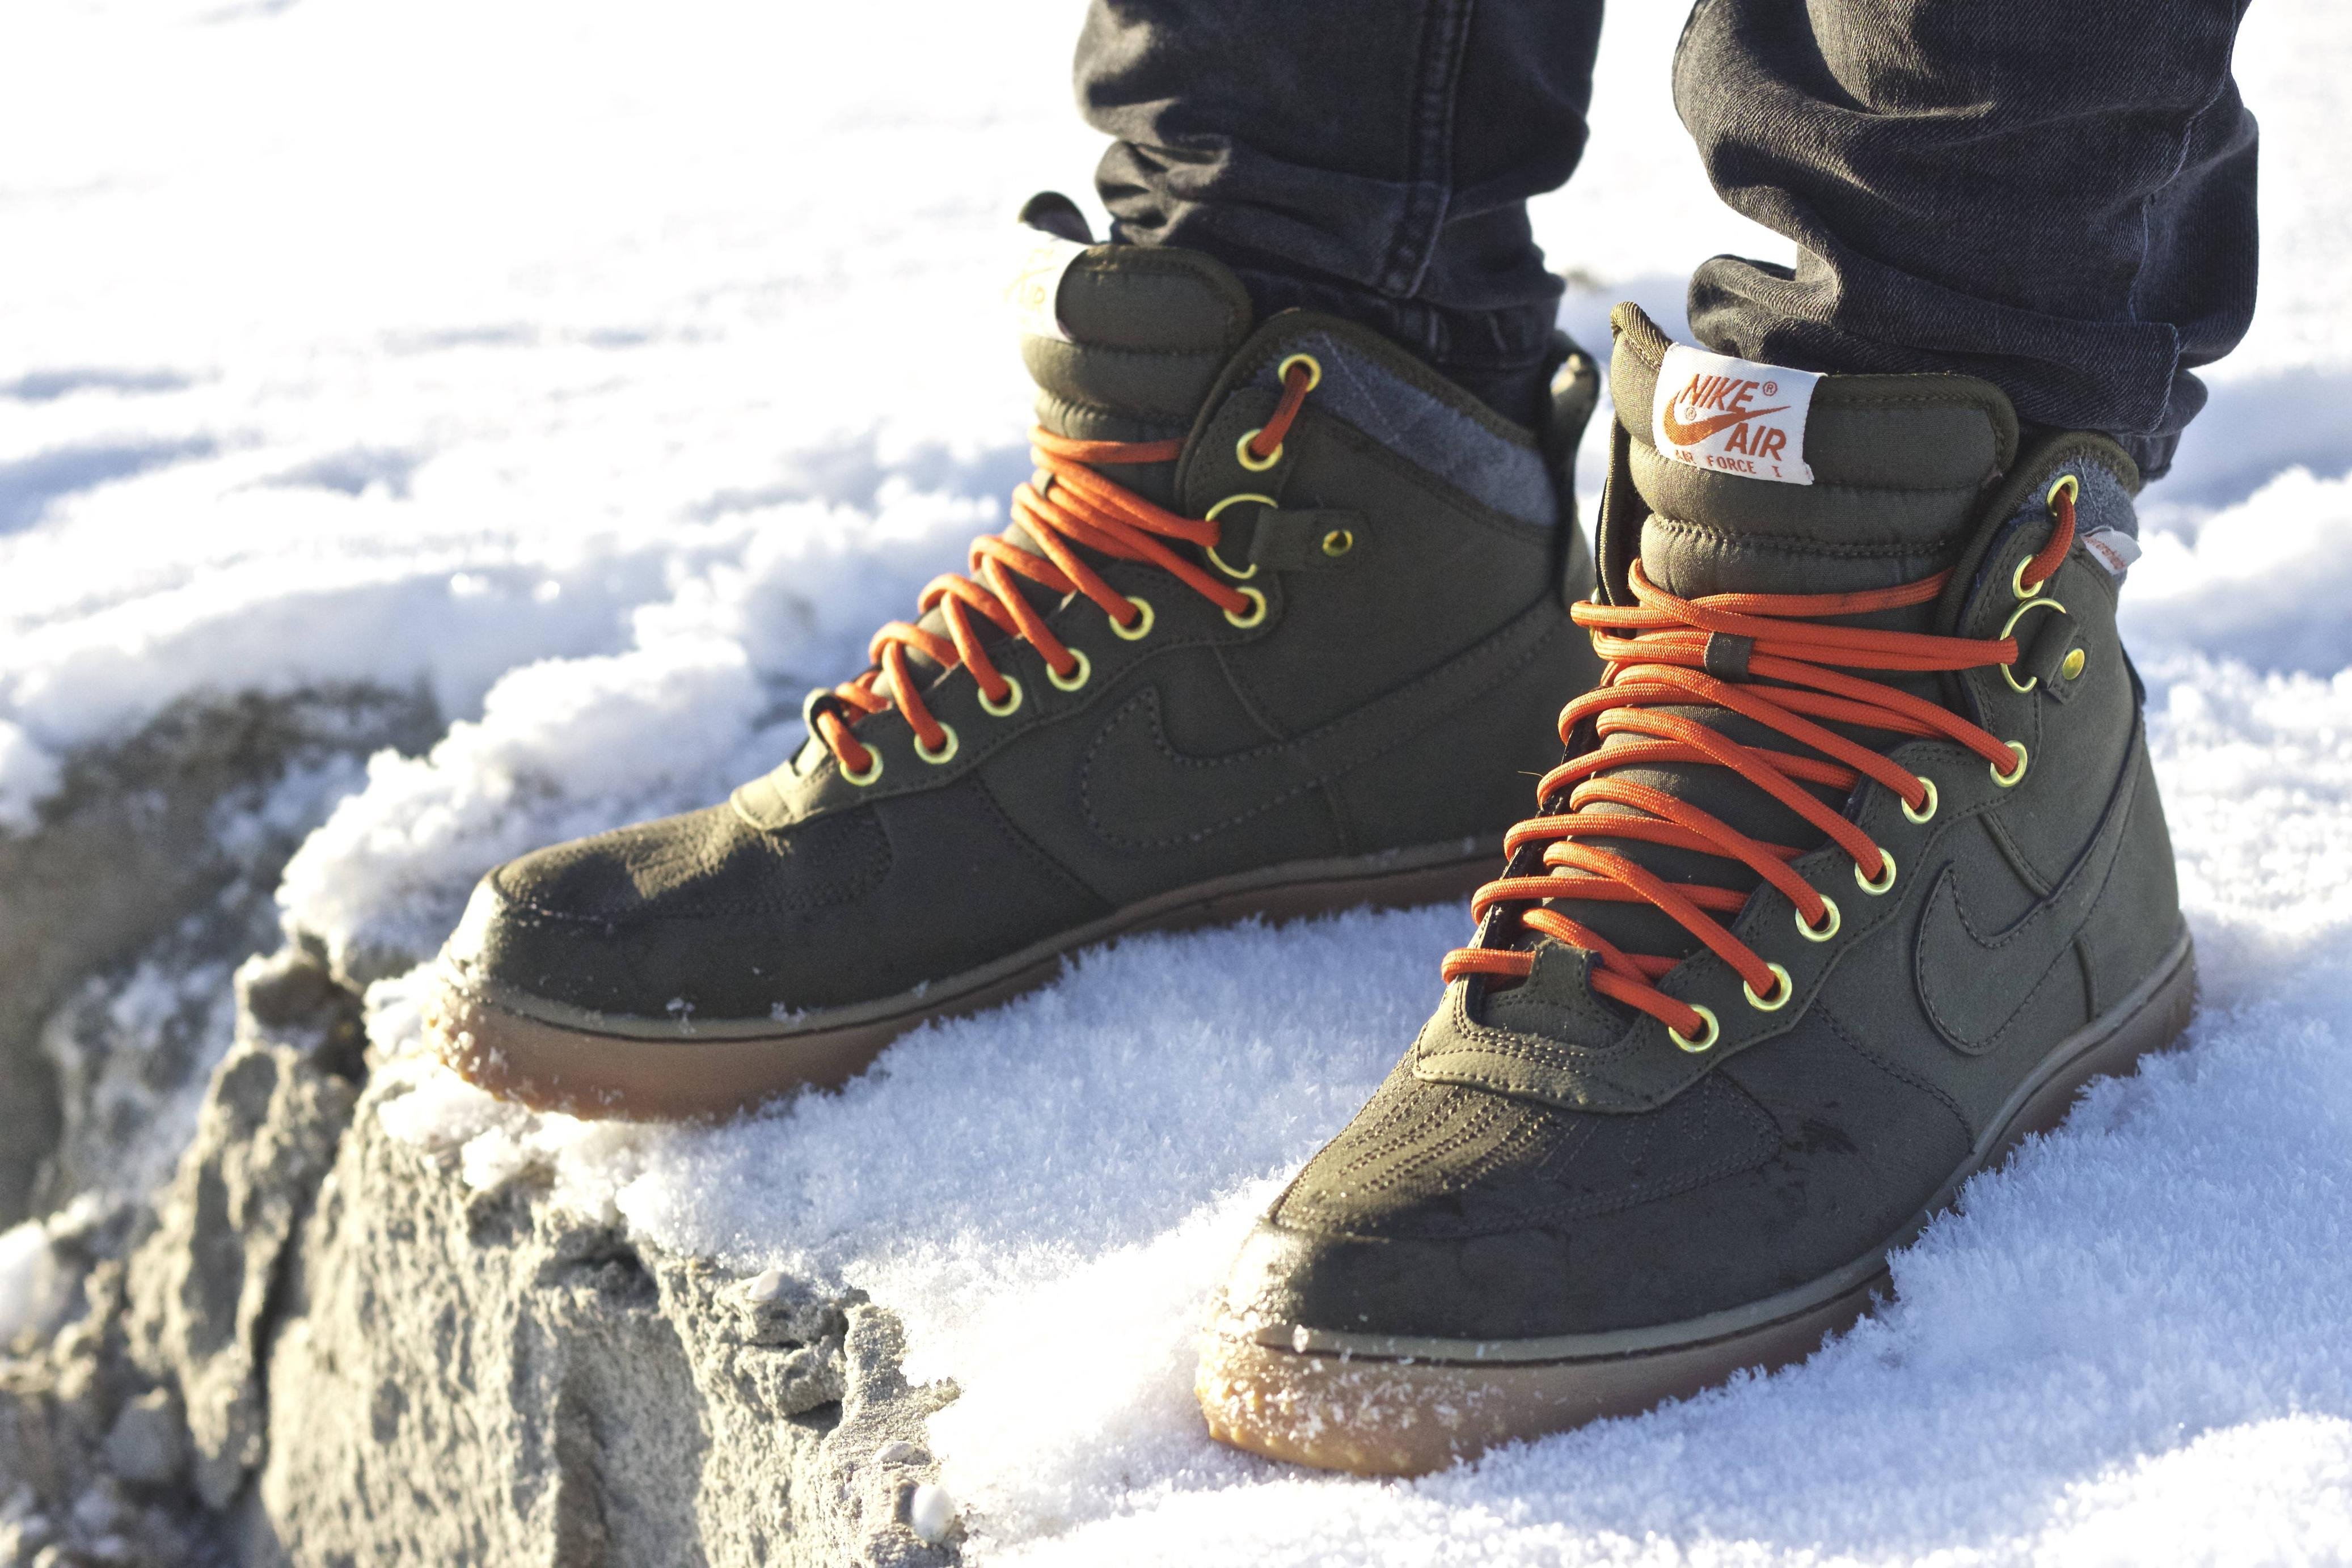 Зимние аиры. Nike Air Boots. Nike Air Force Boot. Af1 Duckboot. Кроссовки Nike Air Boot.